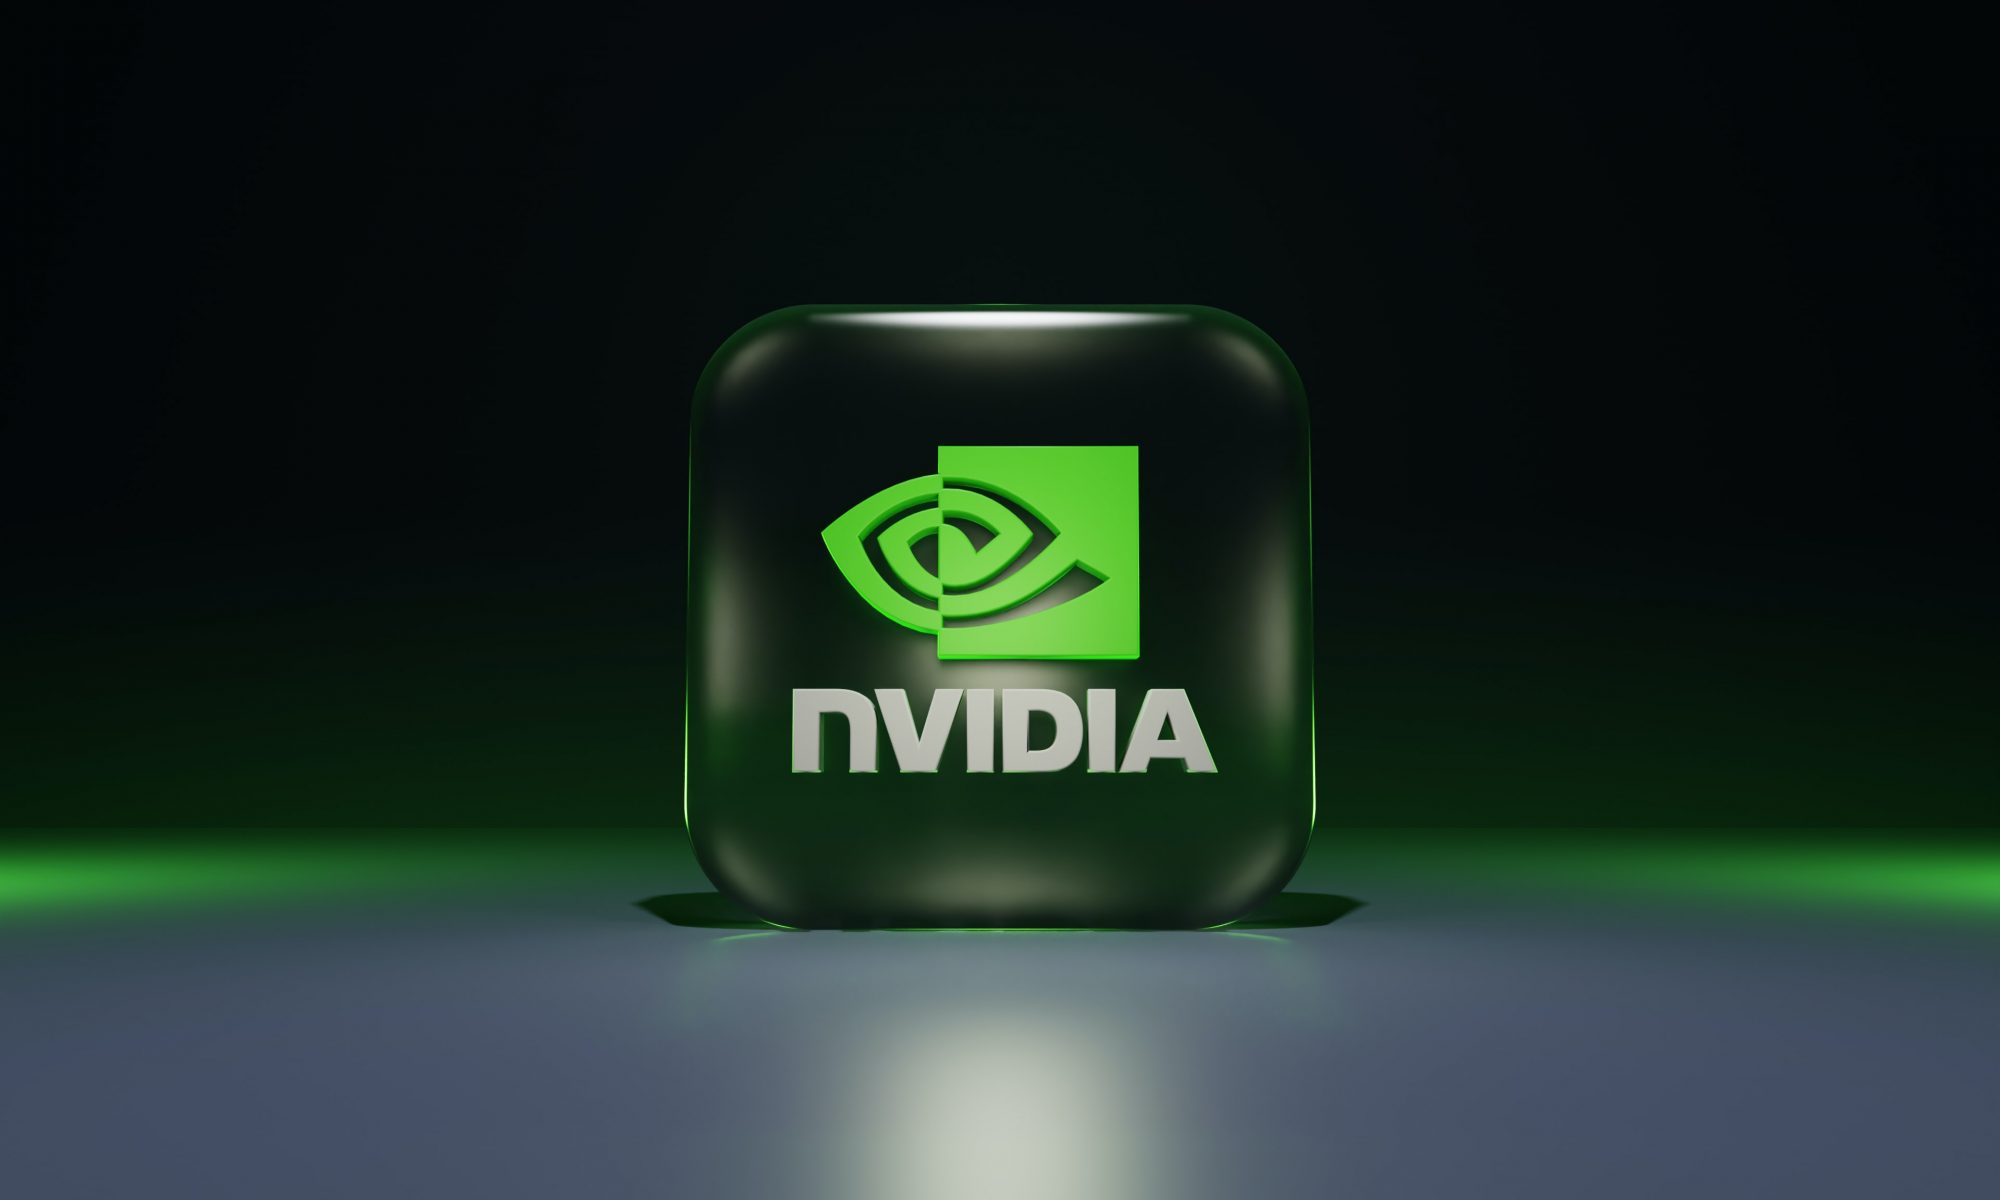 Closeup of green and black NVIDIA logo on a dark background